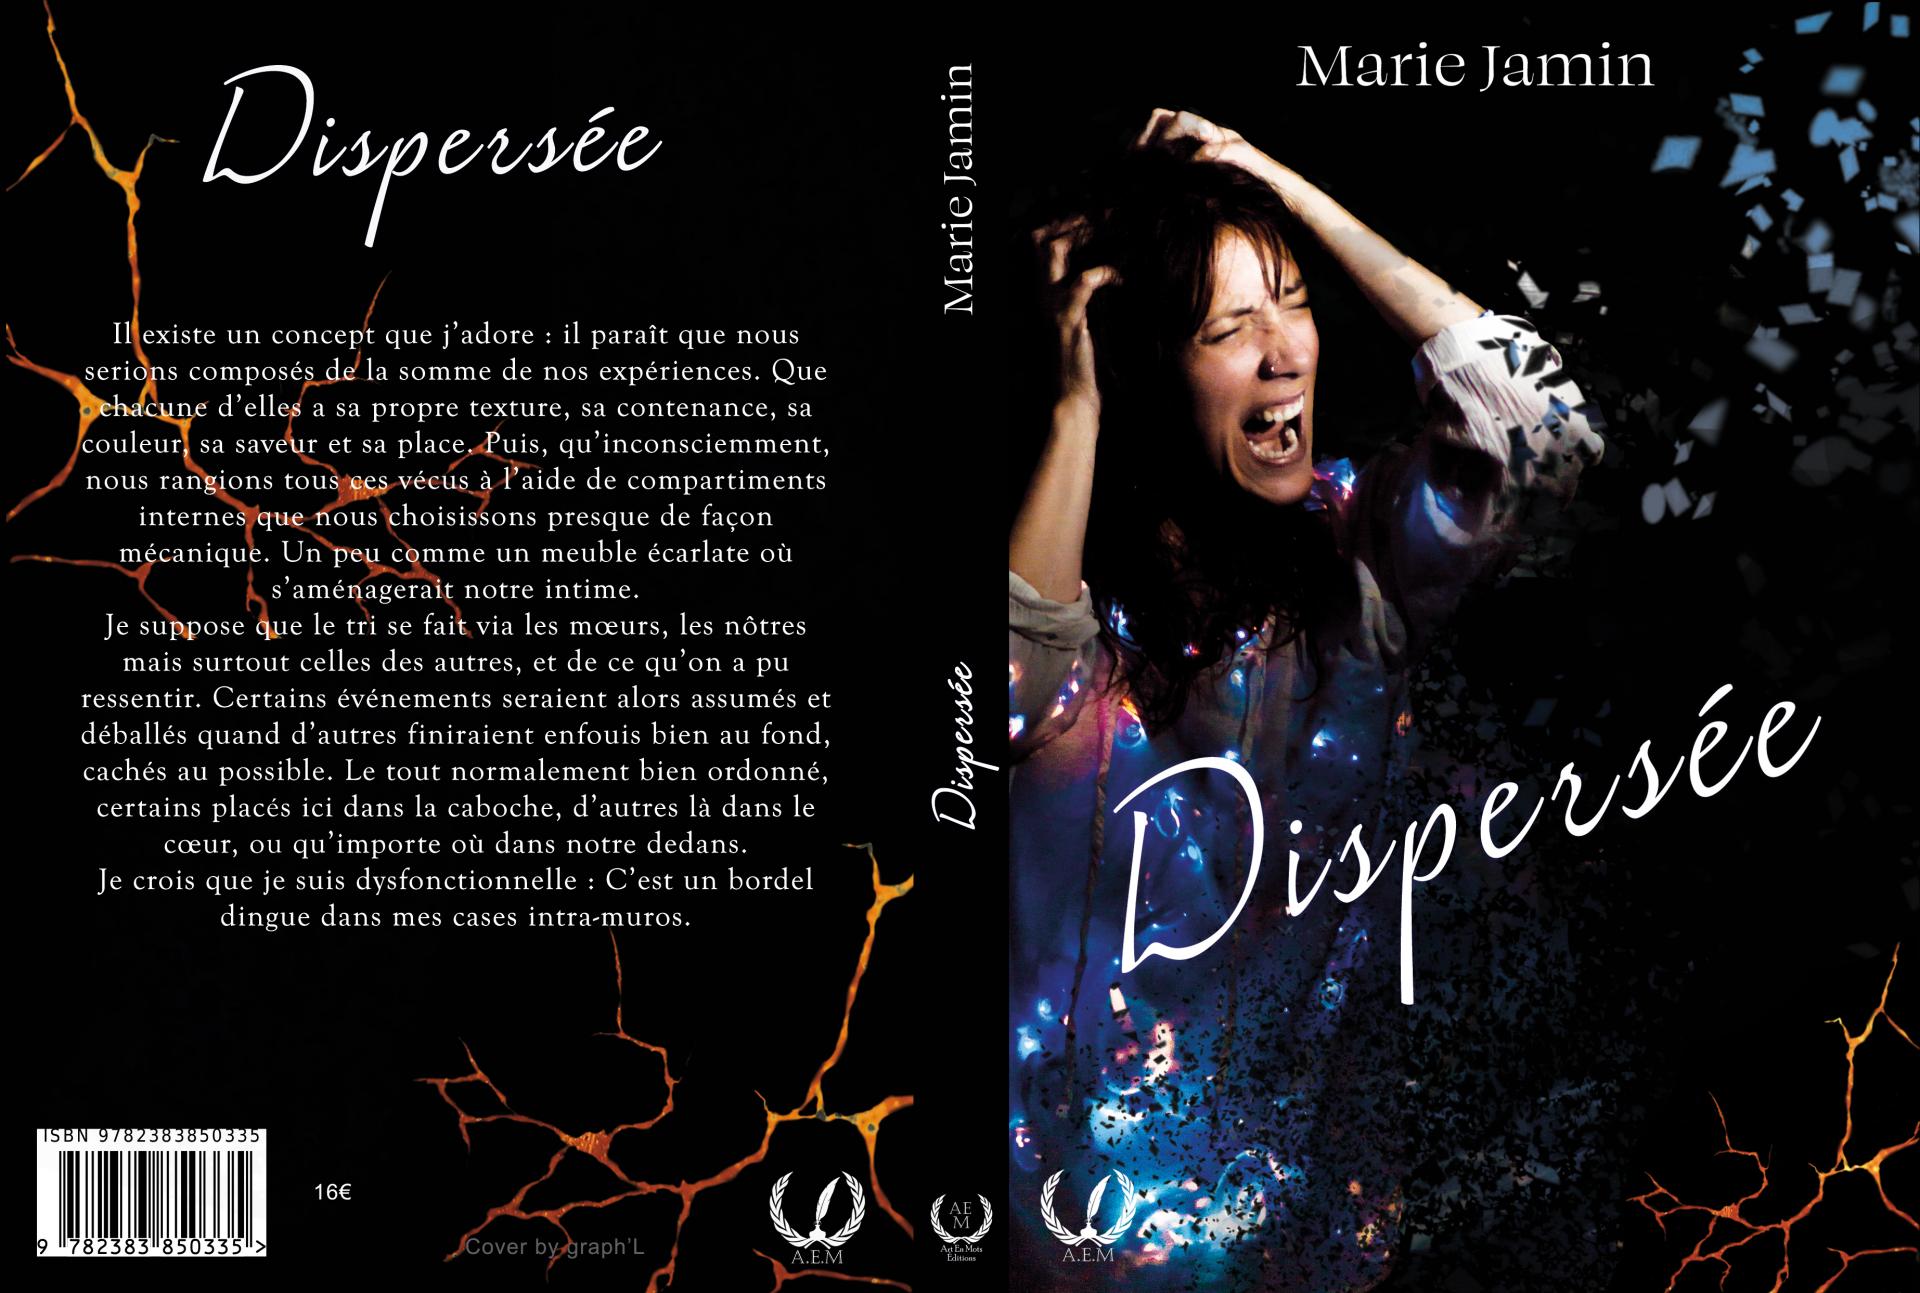 Cover dispersee